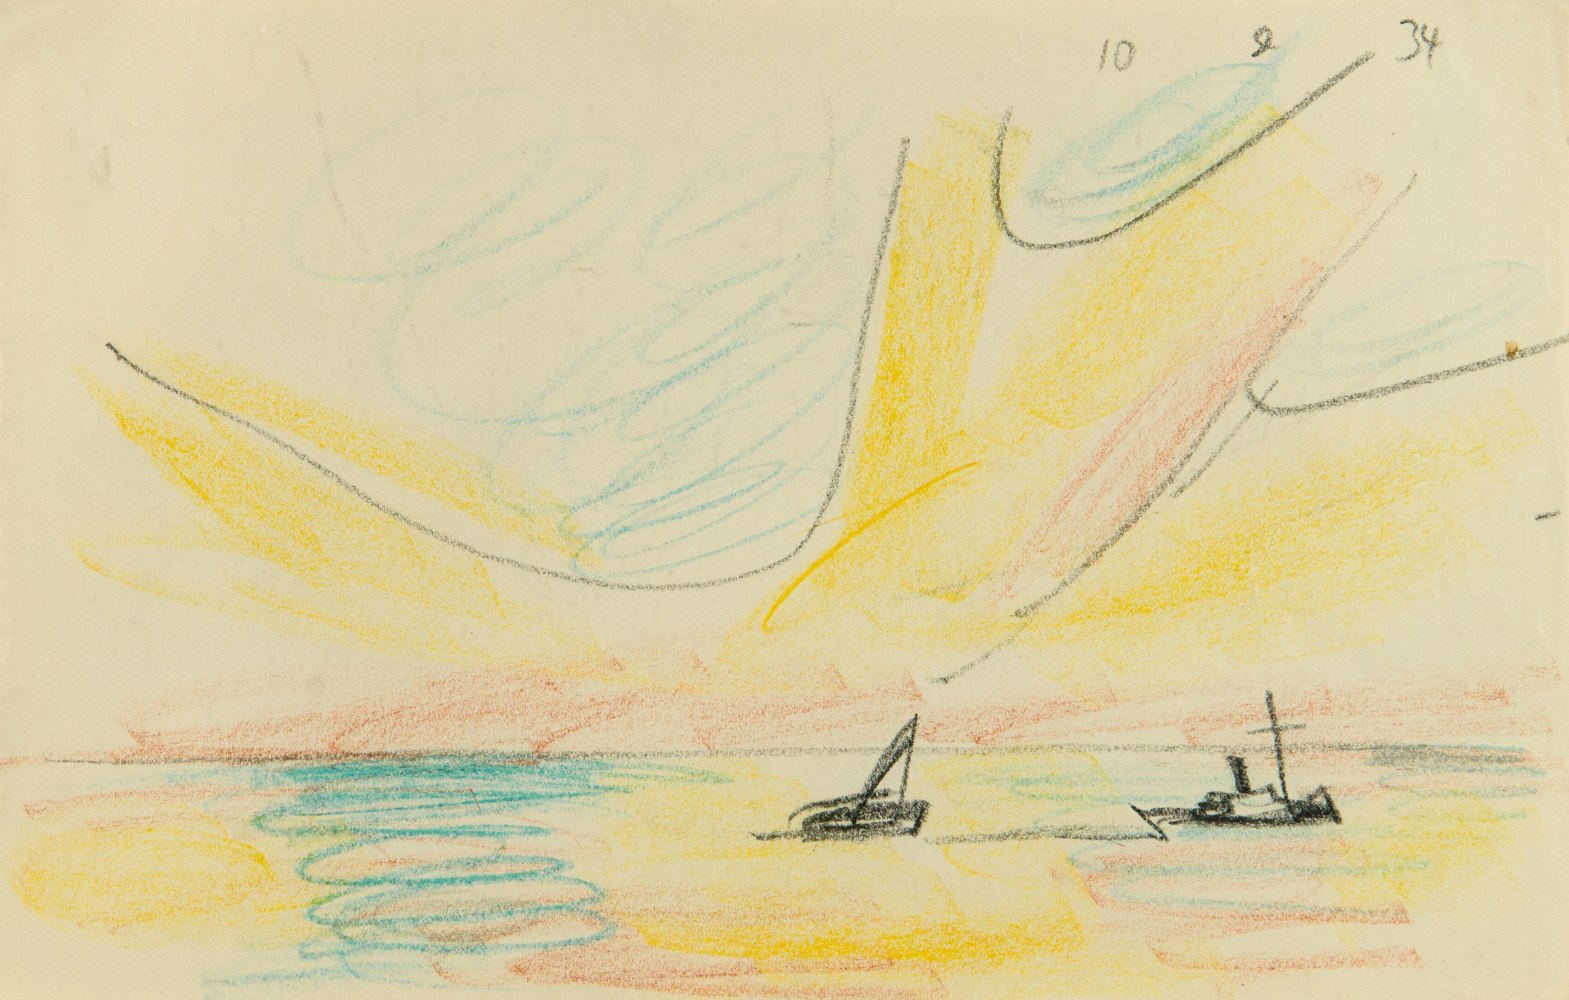 Lyonel&amp;nbsp;Feininger (1871&amp;ndash;1956)
(Two Boats on the Sea at Sundown), 1934
Crayon and pencil on paper
5 9/16&amp;nbsp;x 8 3/4&amp;nbsp;in. (14.1&amp;nbsp;x 22.2&amp;nbsp;cm)
Dated upper right:&amp;nbsp;10 9 34